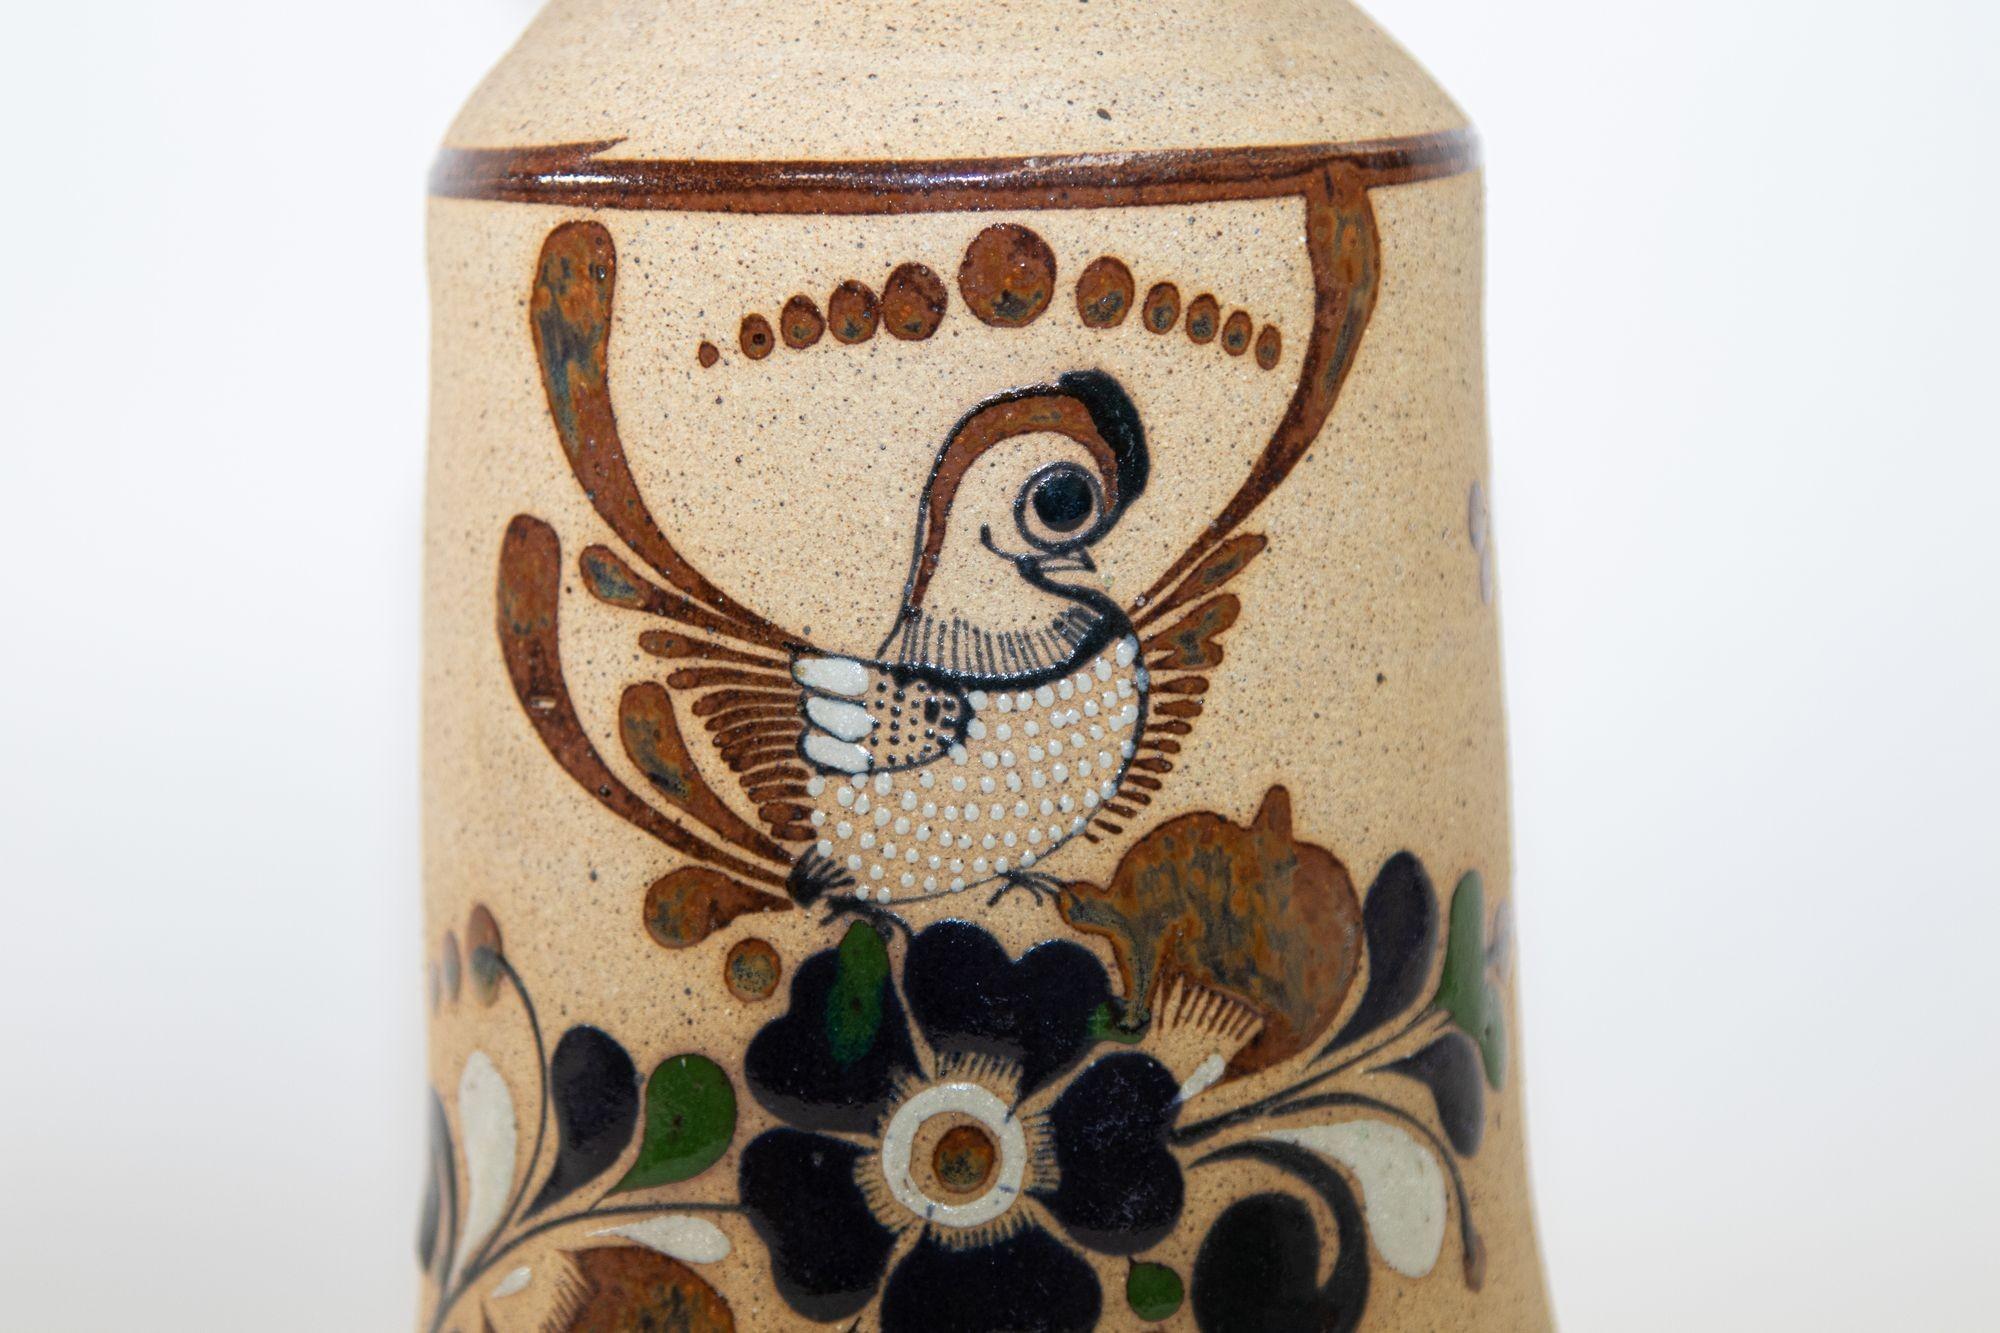 Vintage Large Folk Art Tonala Sandstone Pottery Vase, 1960s.
Vintage Large Folk Art Tonala sandstone pottery vase with bird and flowers signed.
Vintage large sandstone vase textured and hand-painted with an abstract bird and floral raised glazed